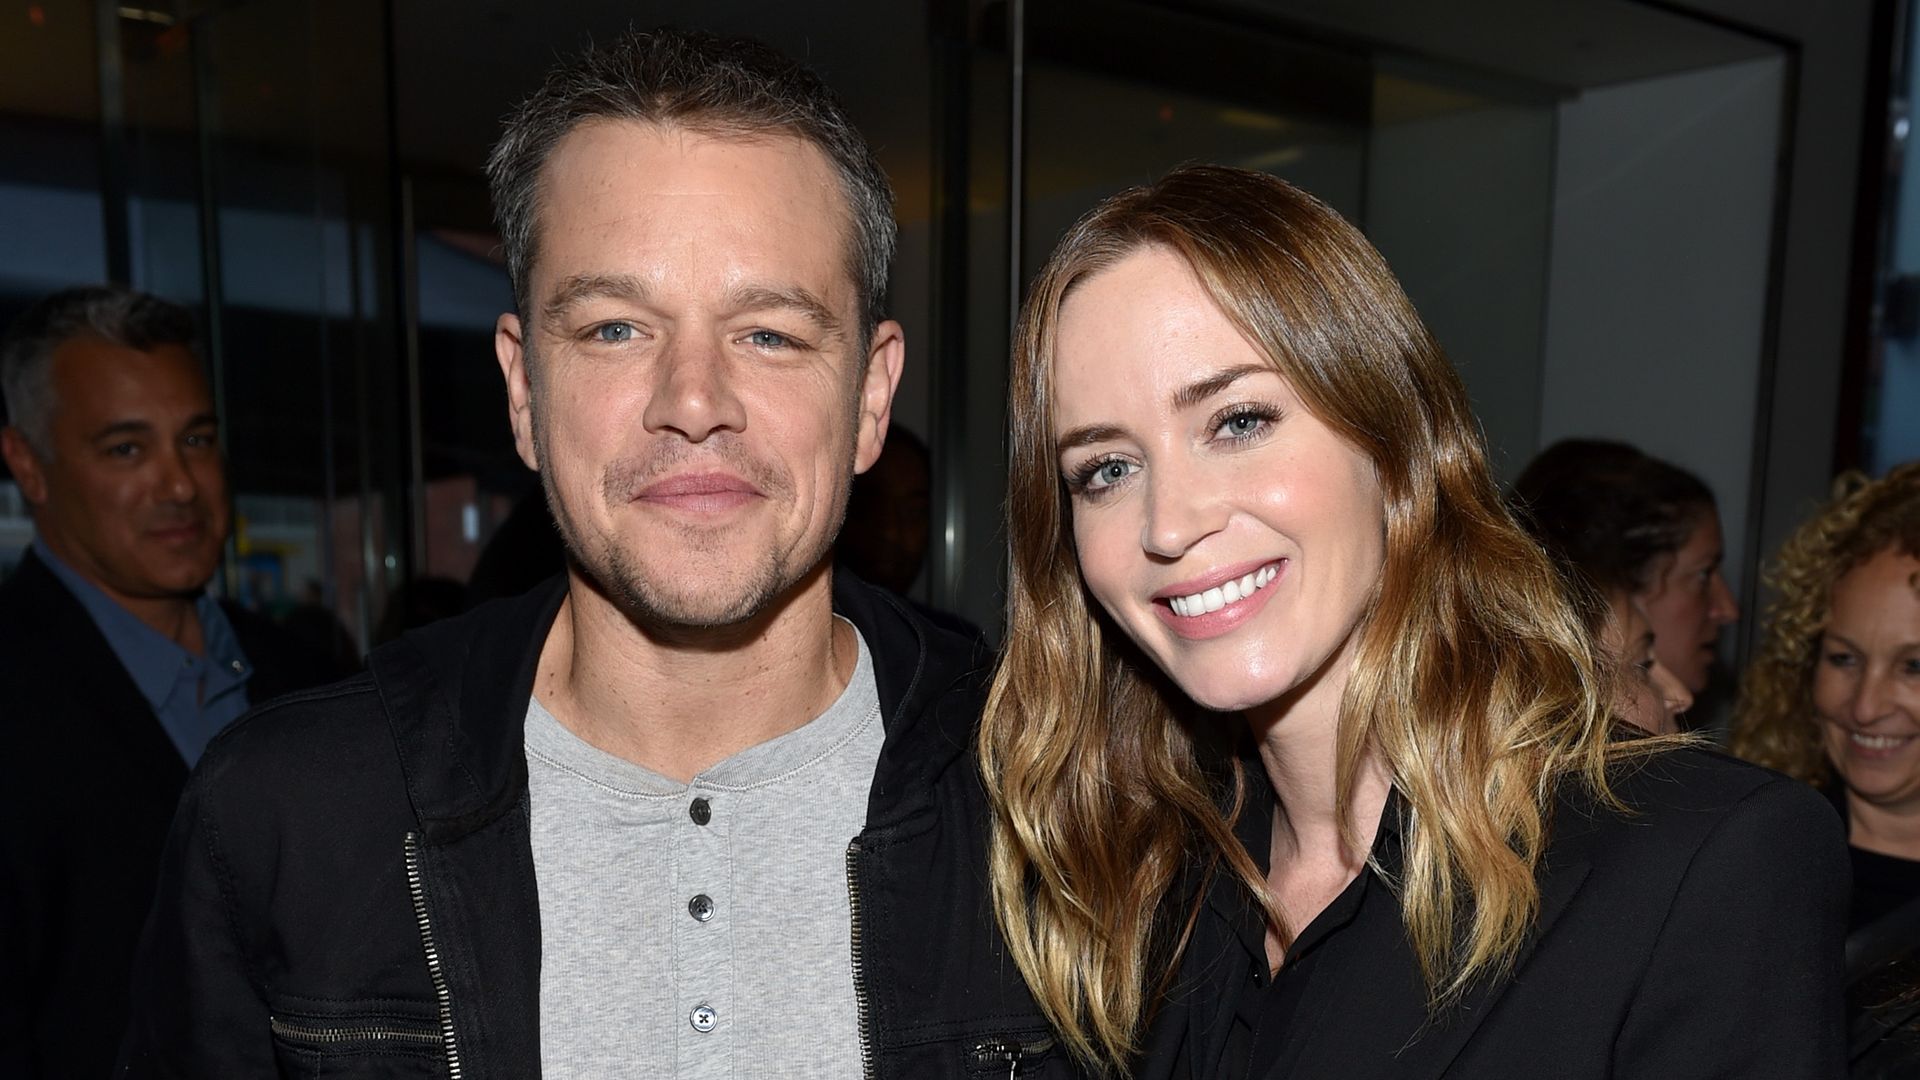 Matt Damon and Emily Blunt attend EW's Must List Party during the 2015 Toronto International Film Festival at Thompson Hotel on September 12, 2015 in Toronto, Canada